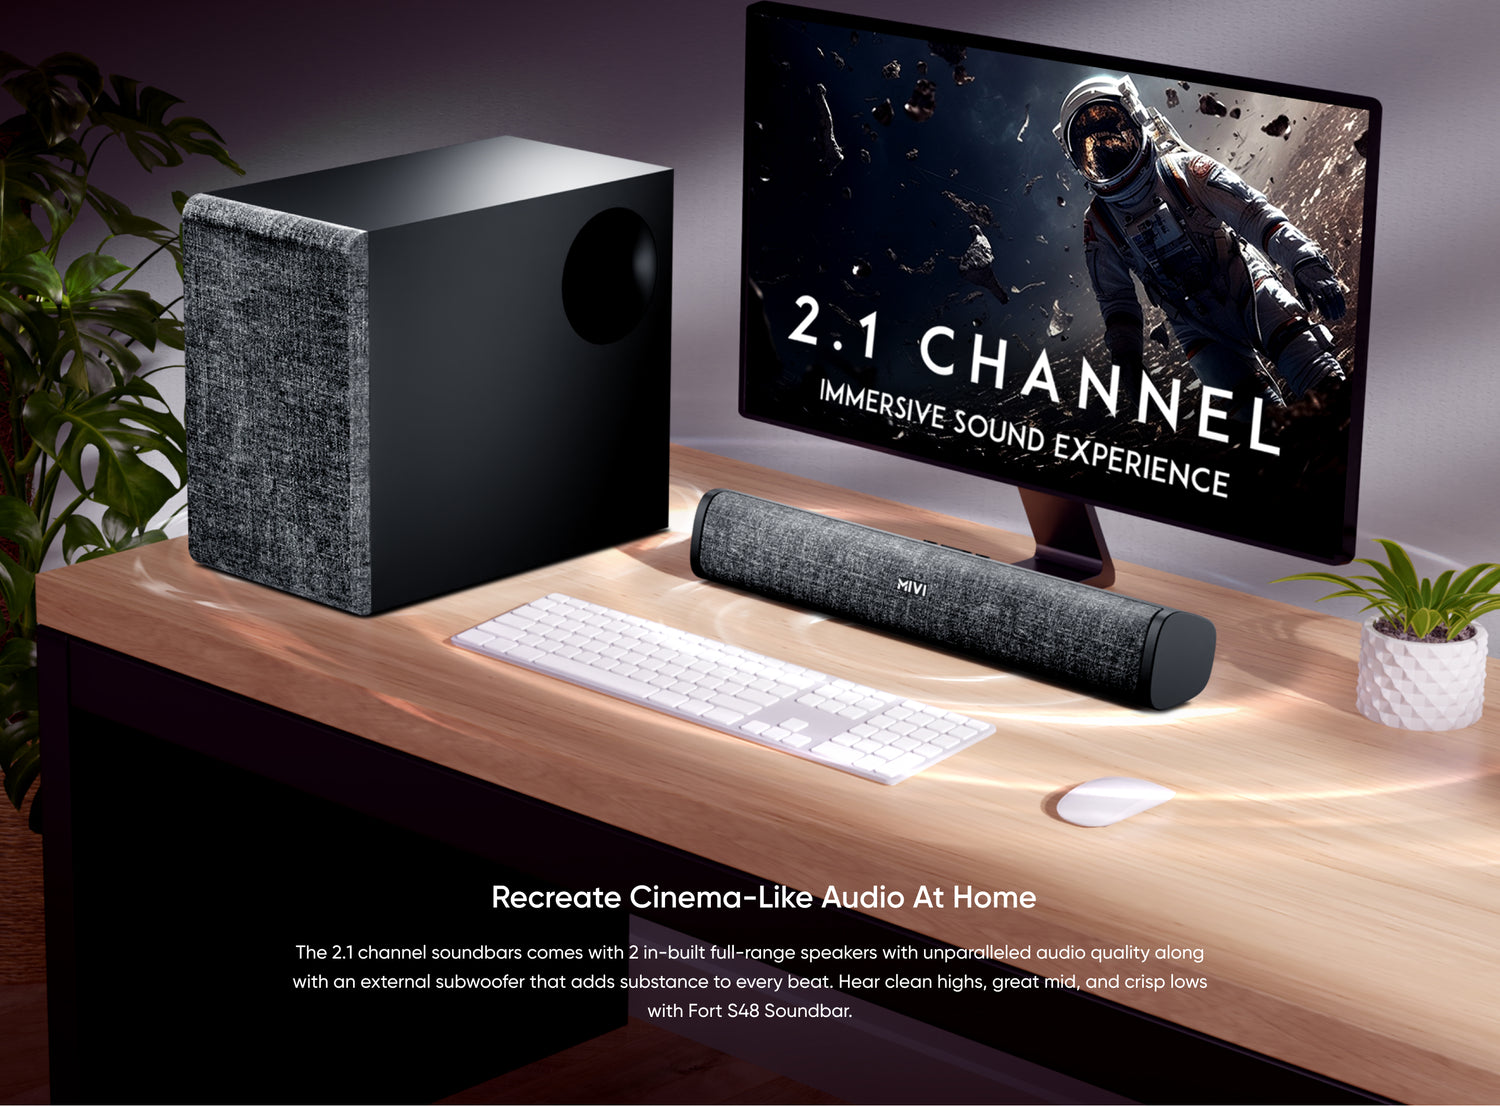 Recreate Cinema-like Audio At Home - The 2.1 channel soundbars comes with 2 in-built full-range speakers with unparalleled audio quality along with an external subwoofer that adds substance to every beat. Hear clean highs, great mid, and crisp lows with Fort S48 Soundbar.